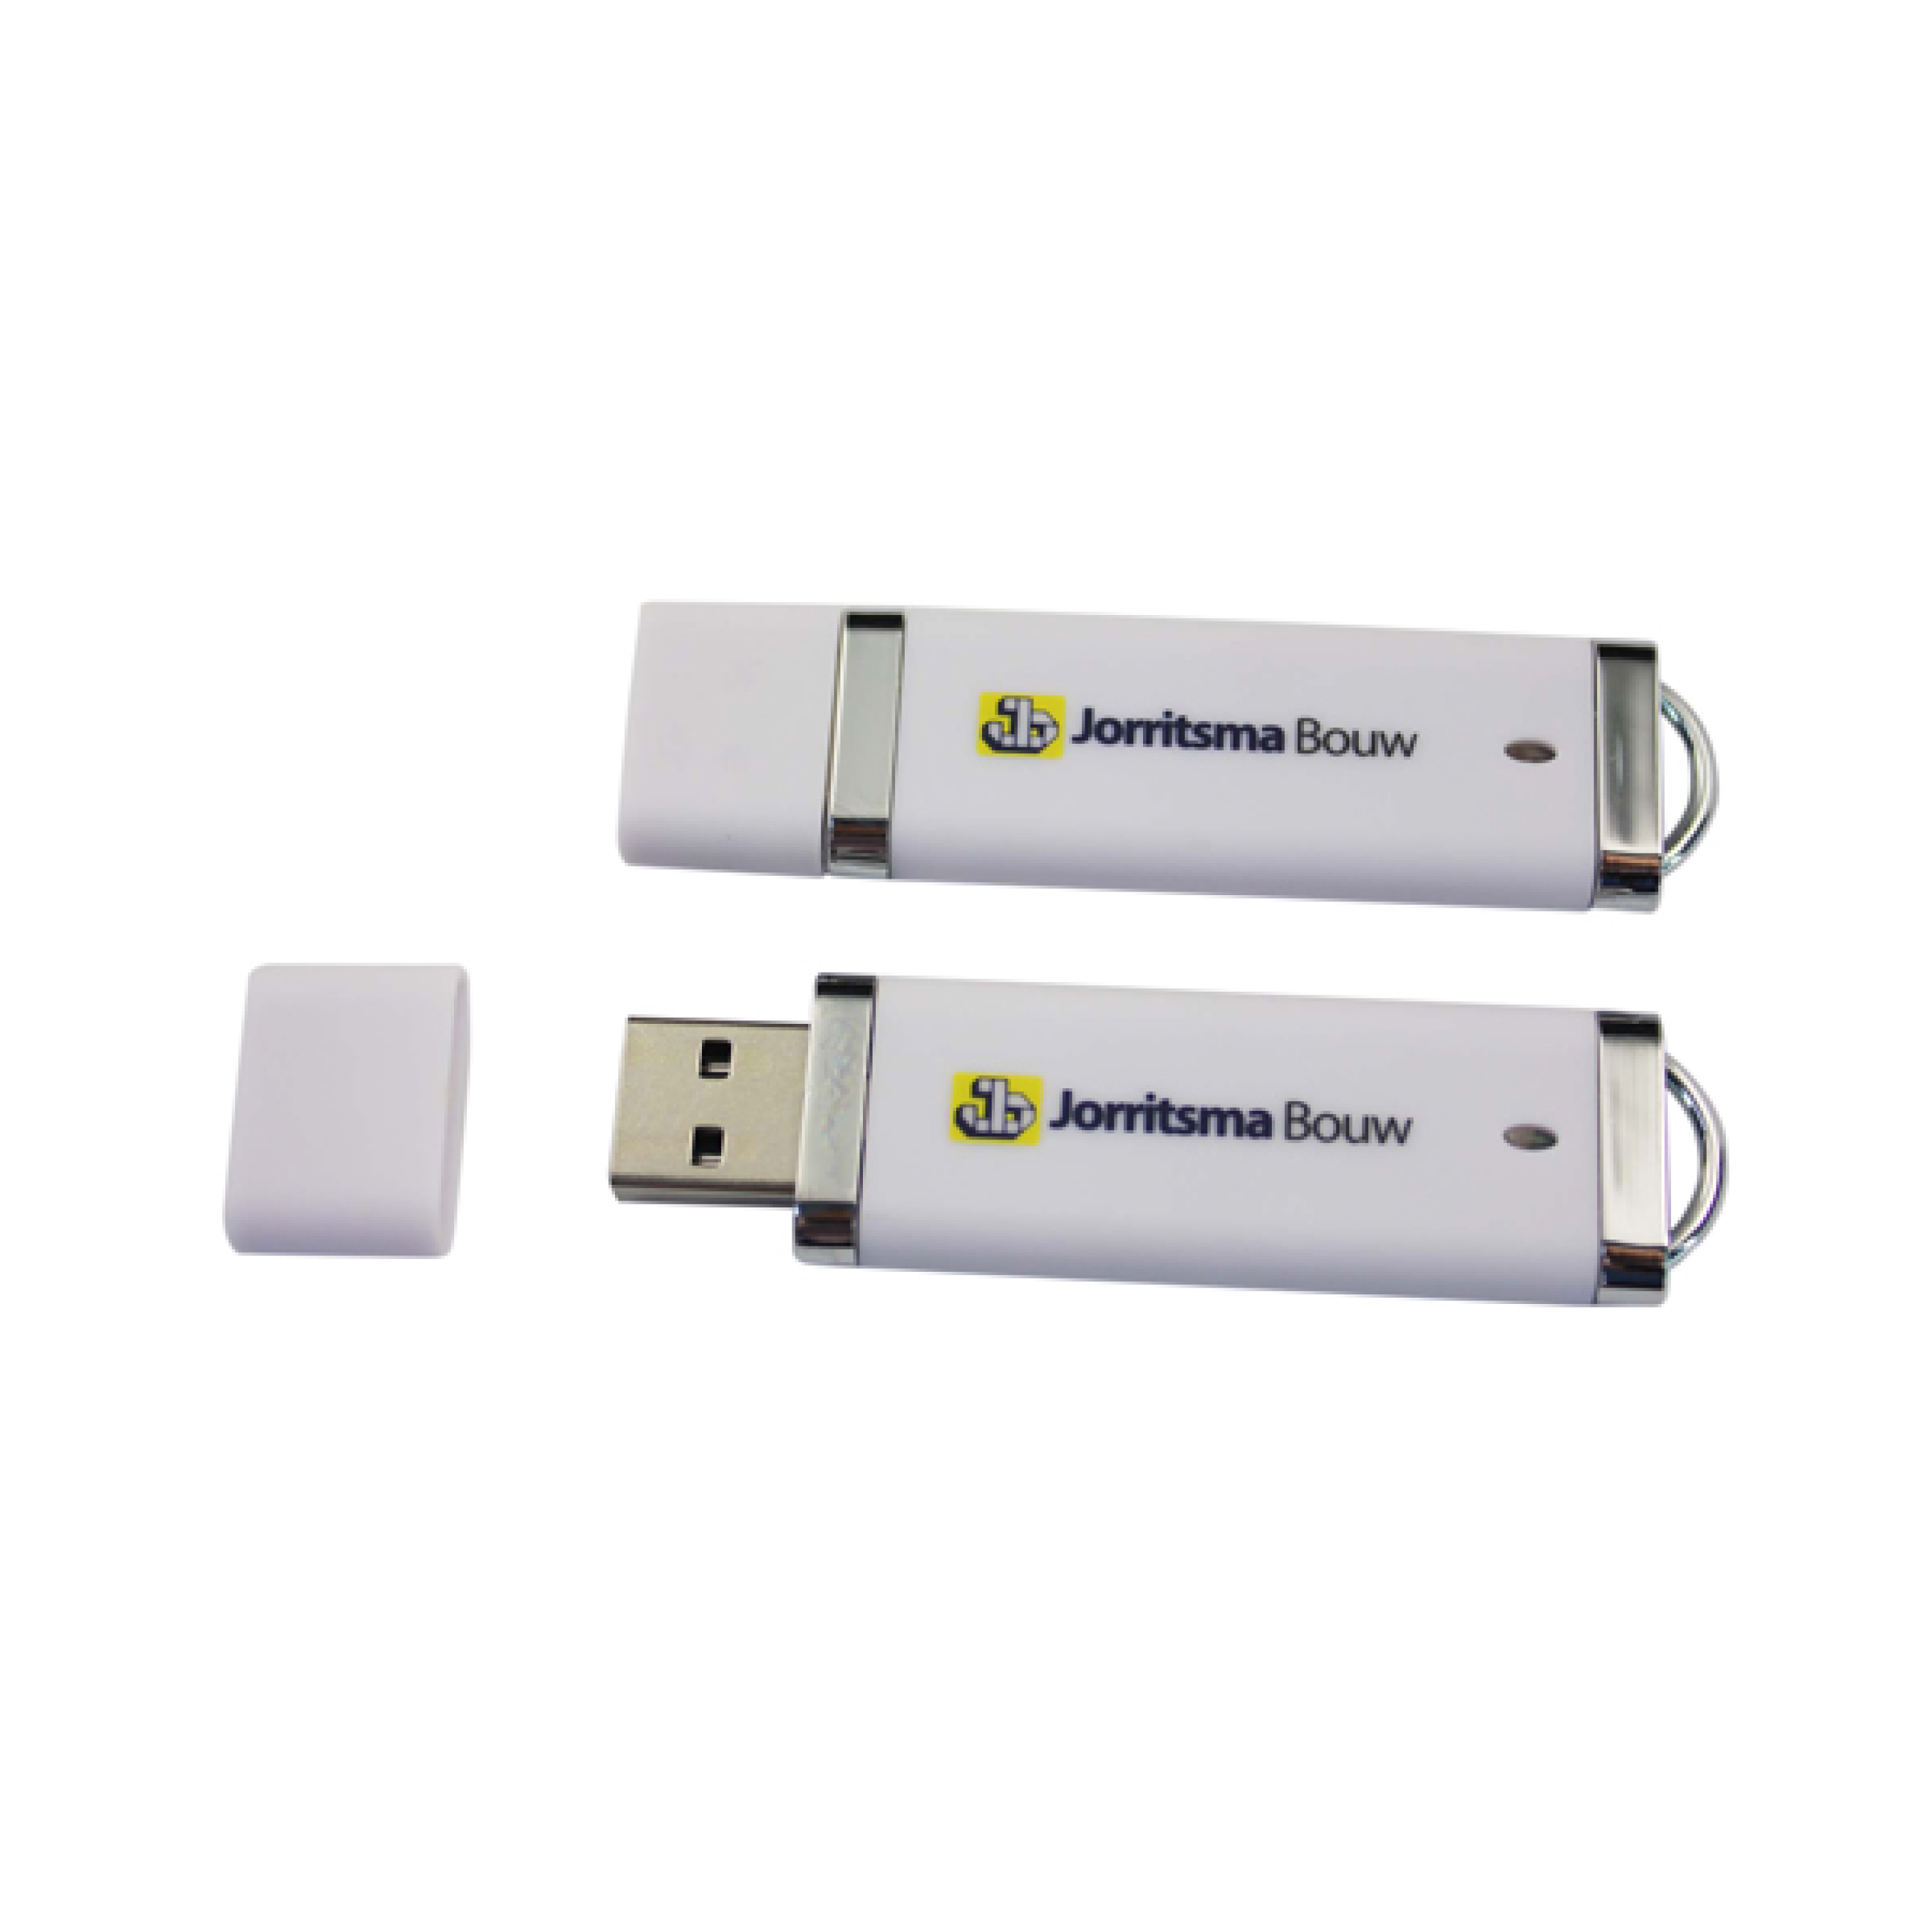 Professional USB business gift H614